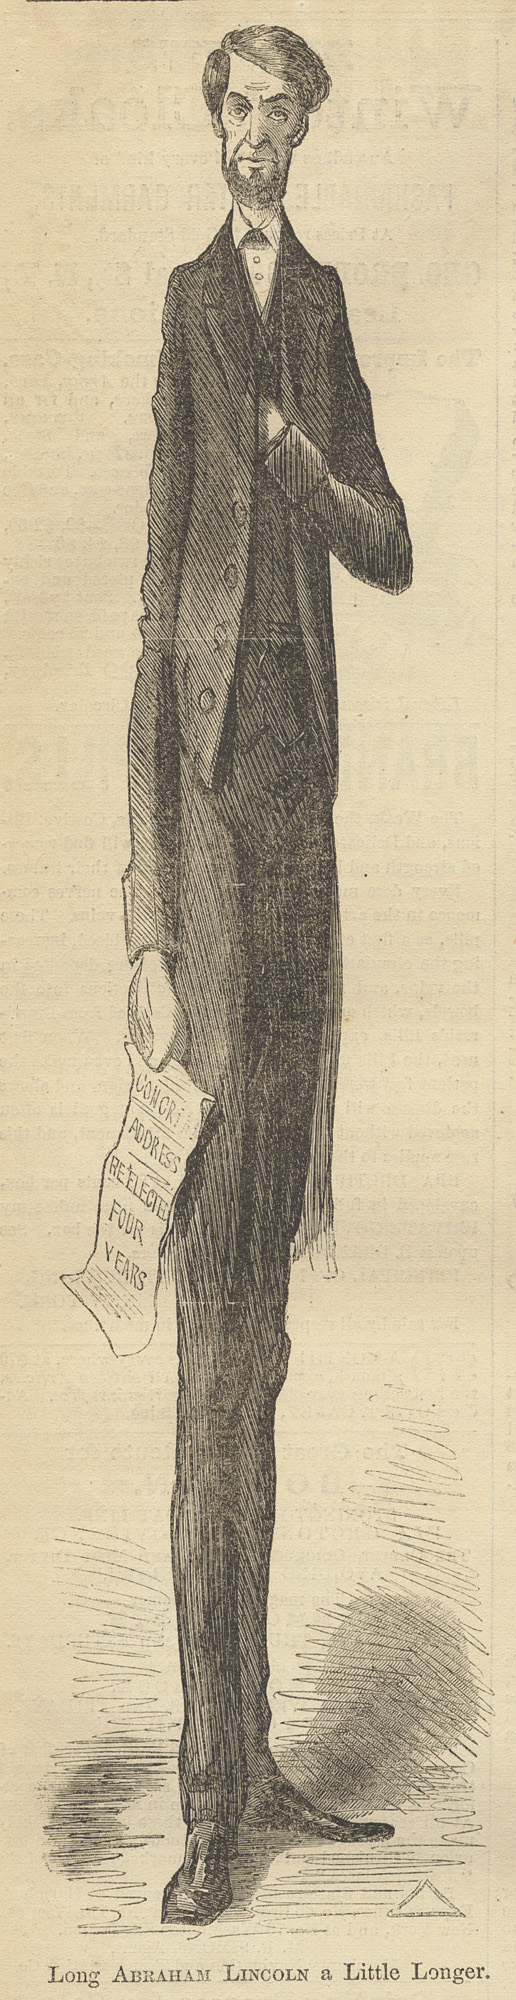 Frank Henry Temple Bellew, Long Abraham Lincoln a Little Longer, Harper's Weekly, November 26, 1864 (Chicago History Museum)